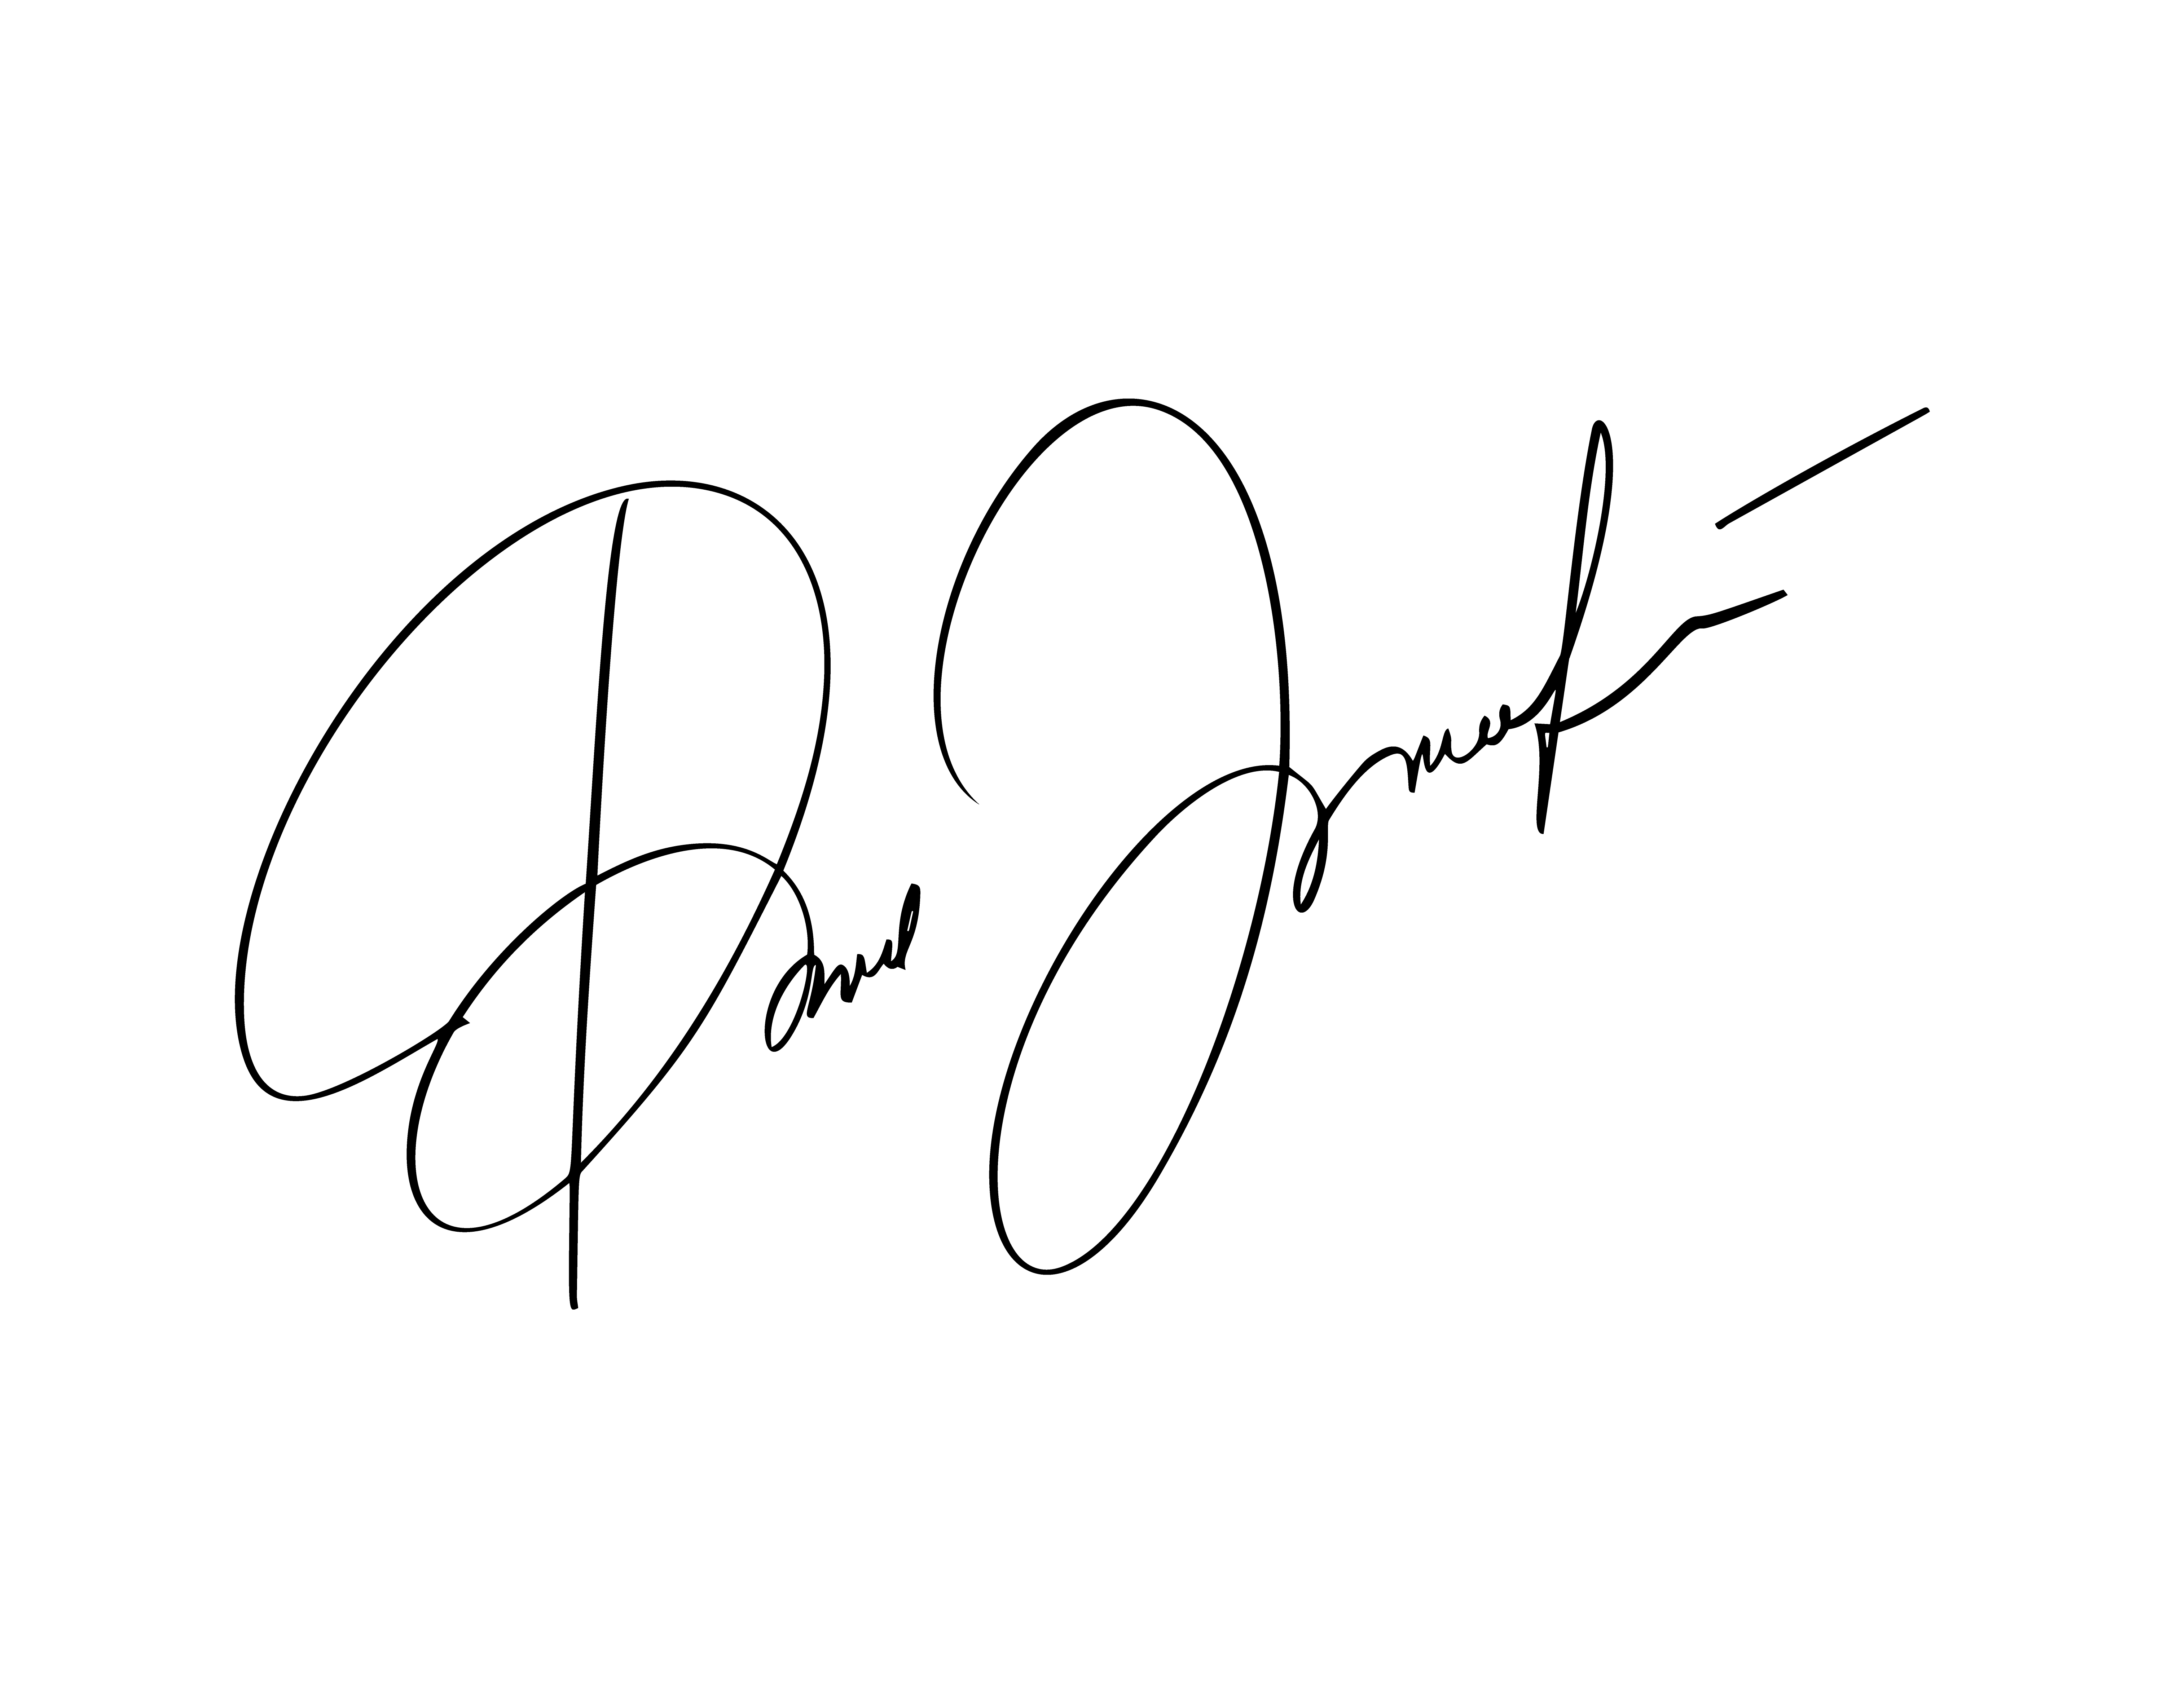 Manual signature for documents on white background. Hand